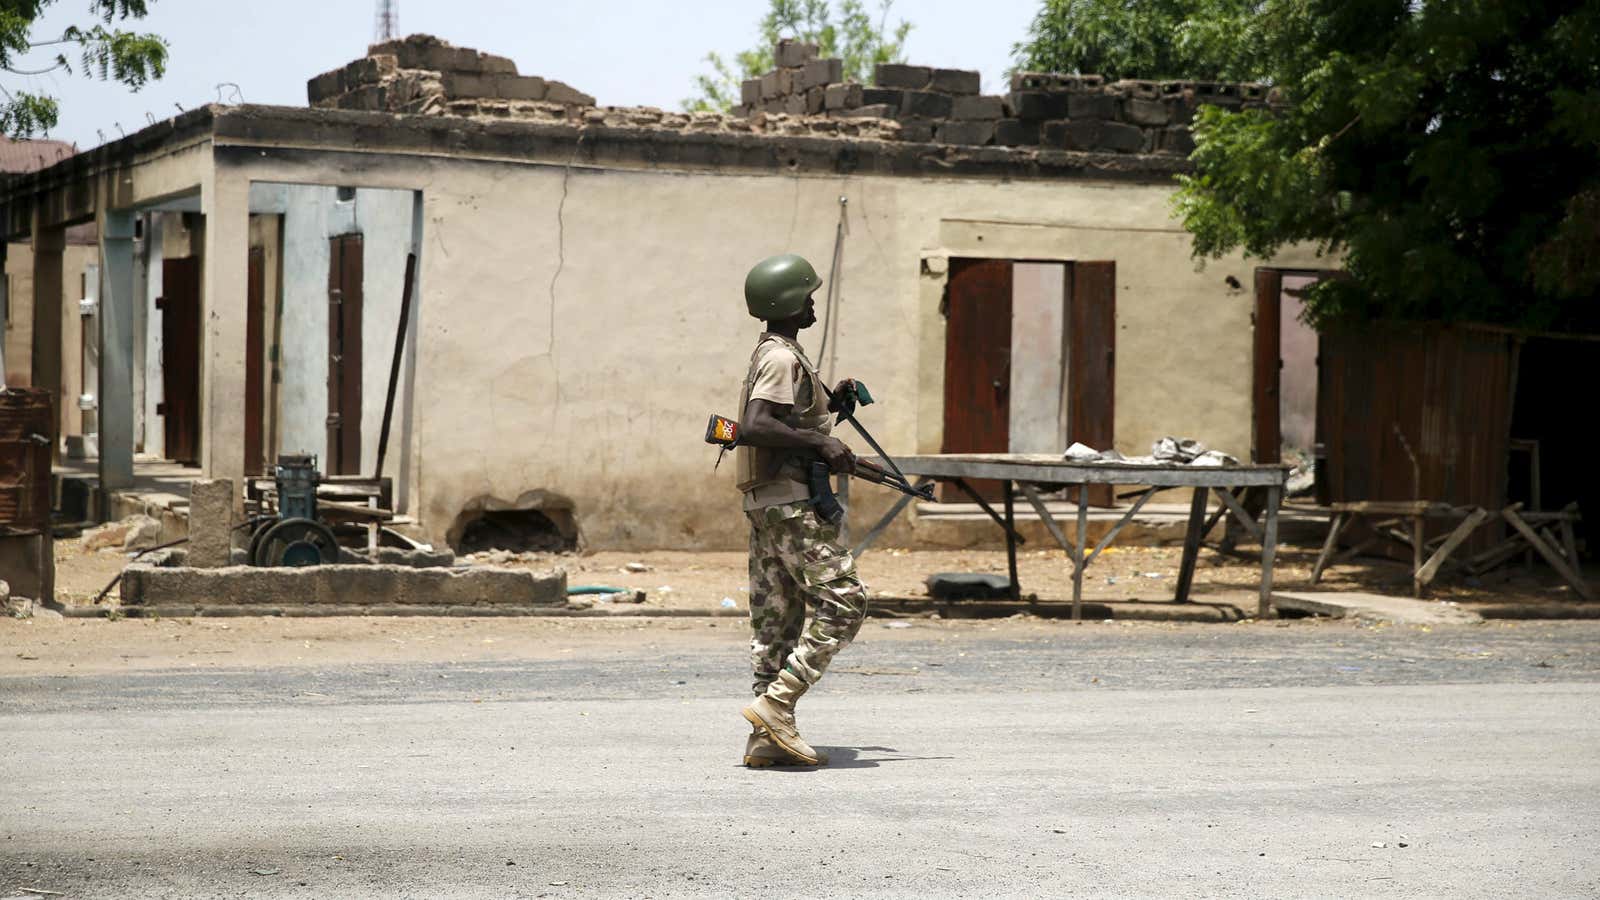 The Nigerian army’s gains are forcing Boko Haram to switch tactics